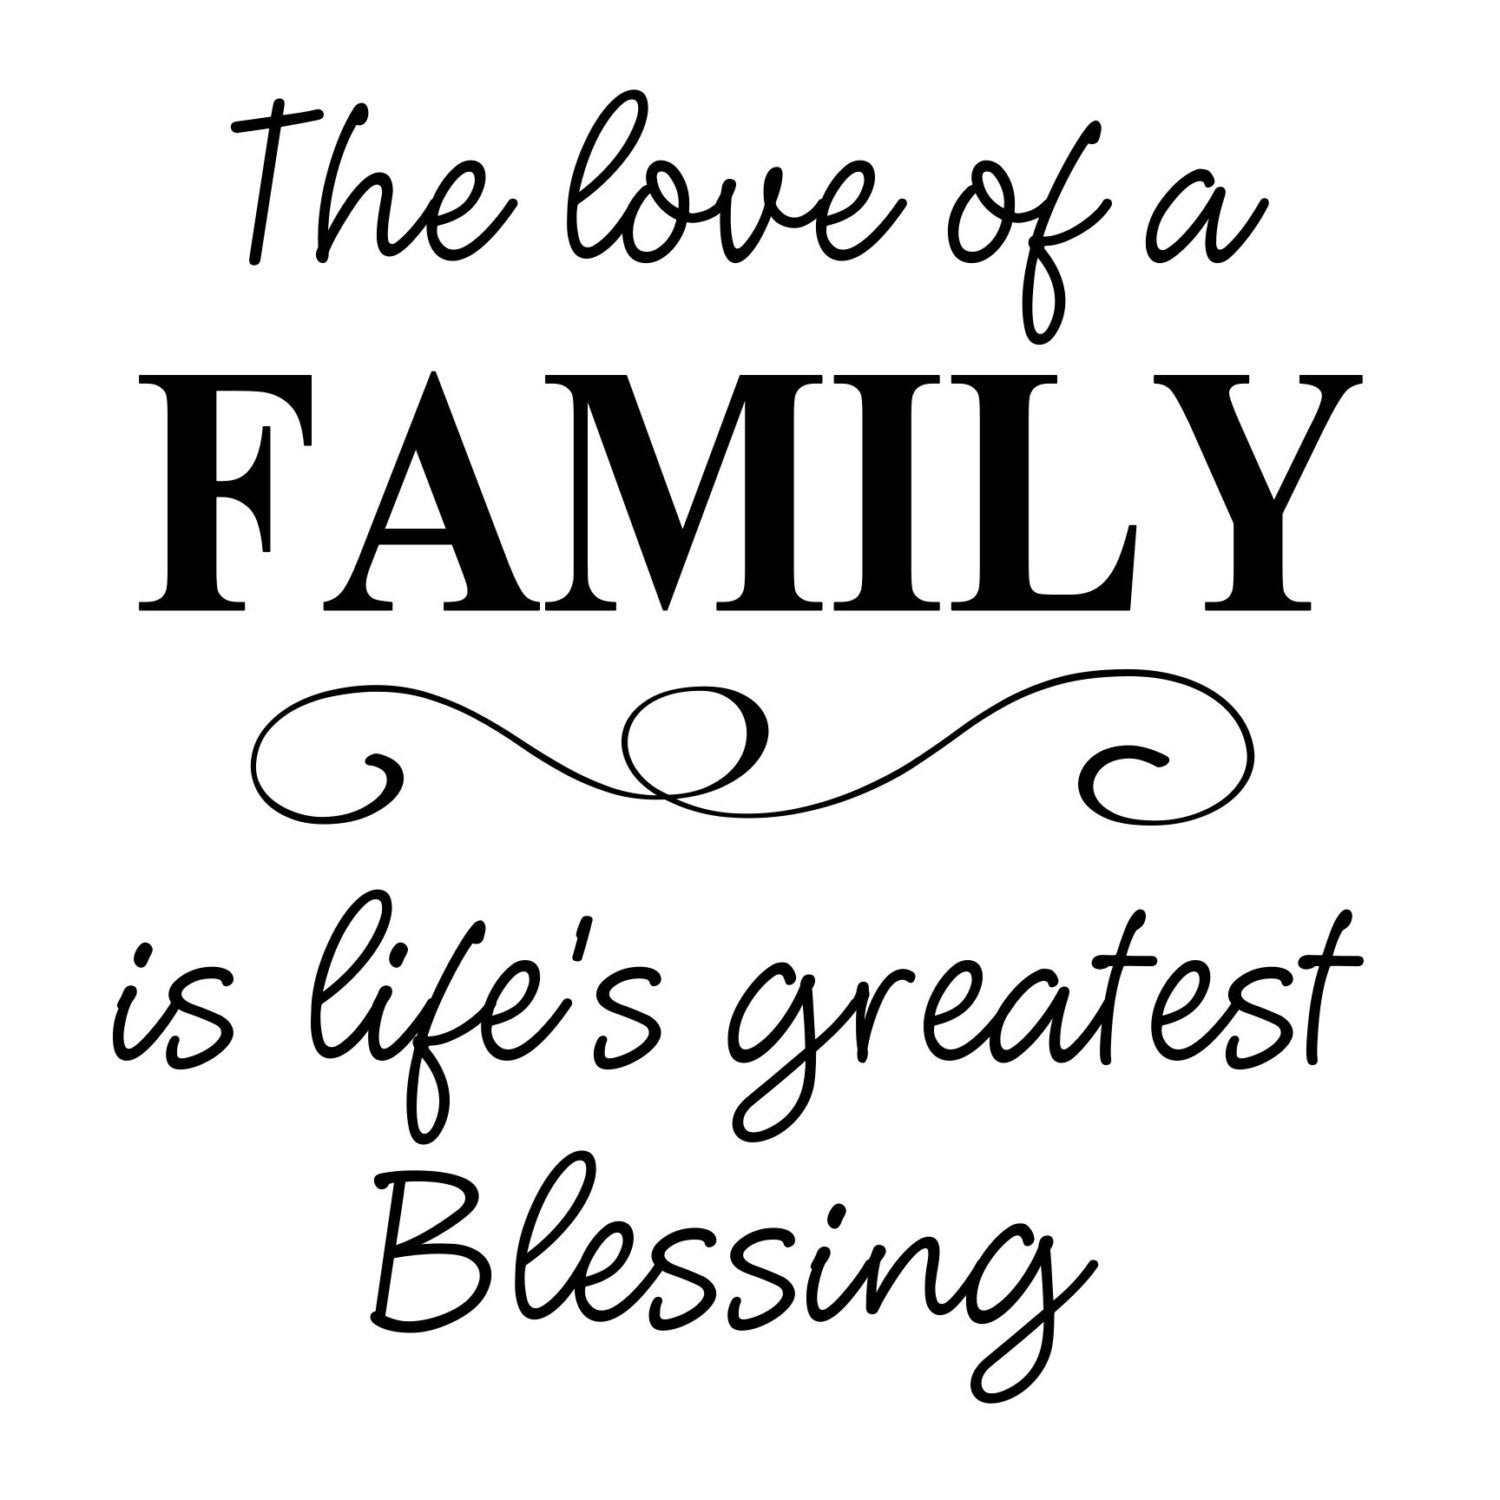 Family Blessings Quotes
 The Love of a Family is Life s Greatest by TheVinyl pany